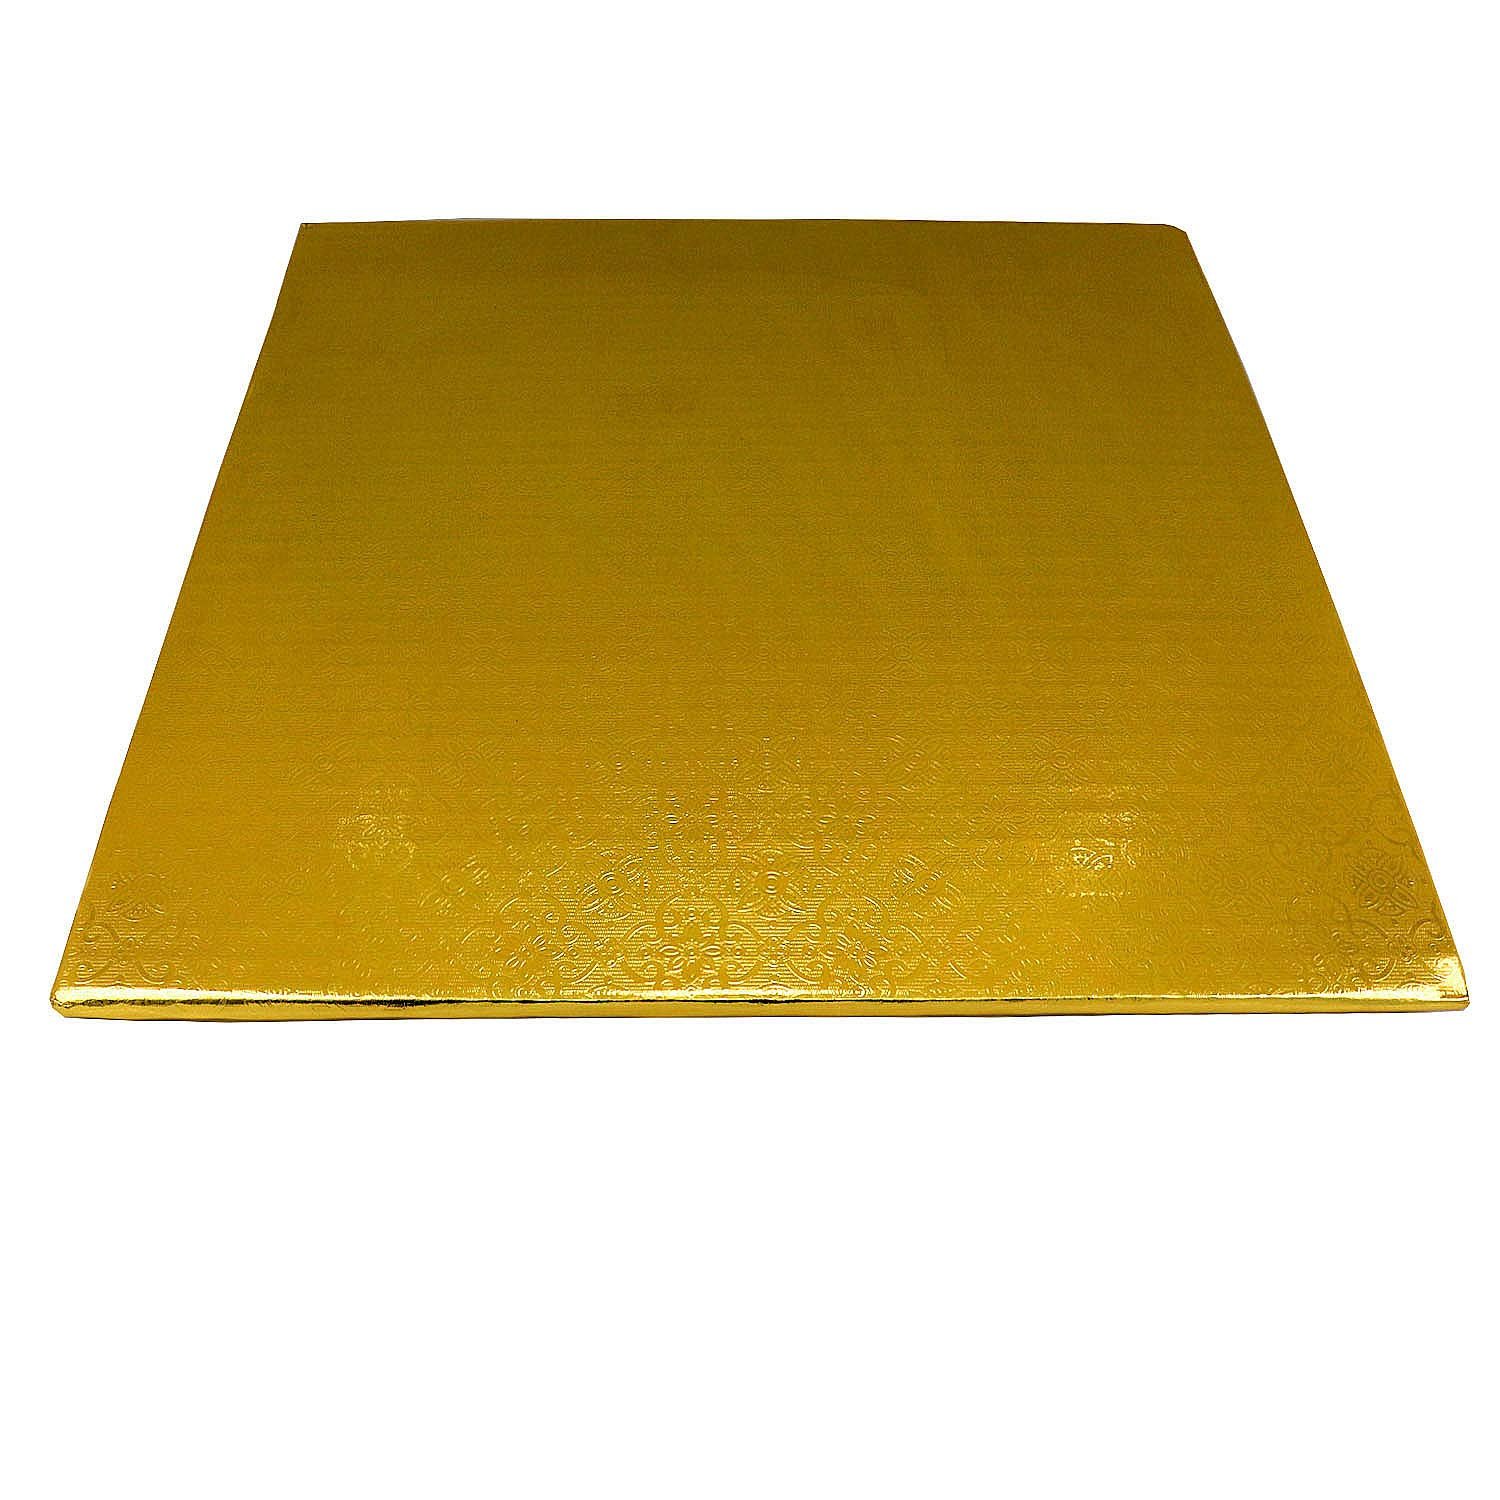 O'Creme Gold Wraparound Square Cake Pastry Drum Board 1/4 Inch Thick, 12 Inch x 12 Inch - Pack of 10 - image 2 of 6